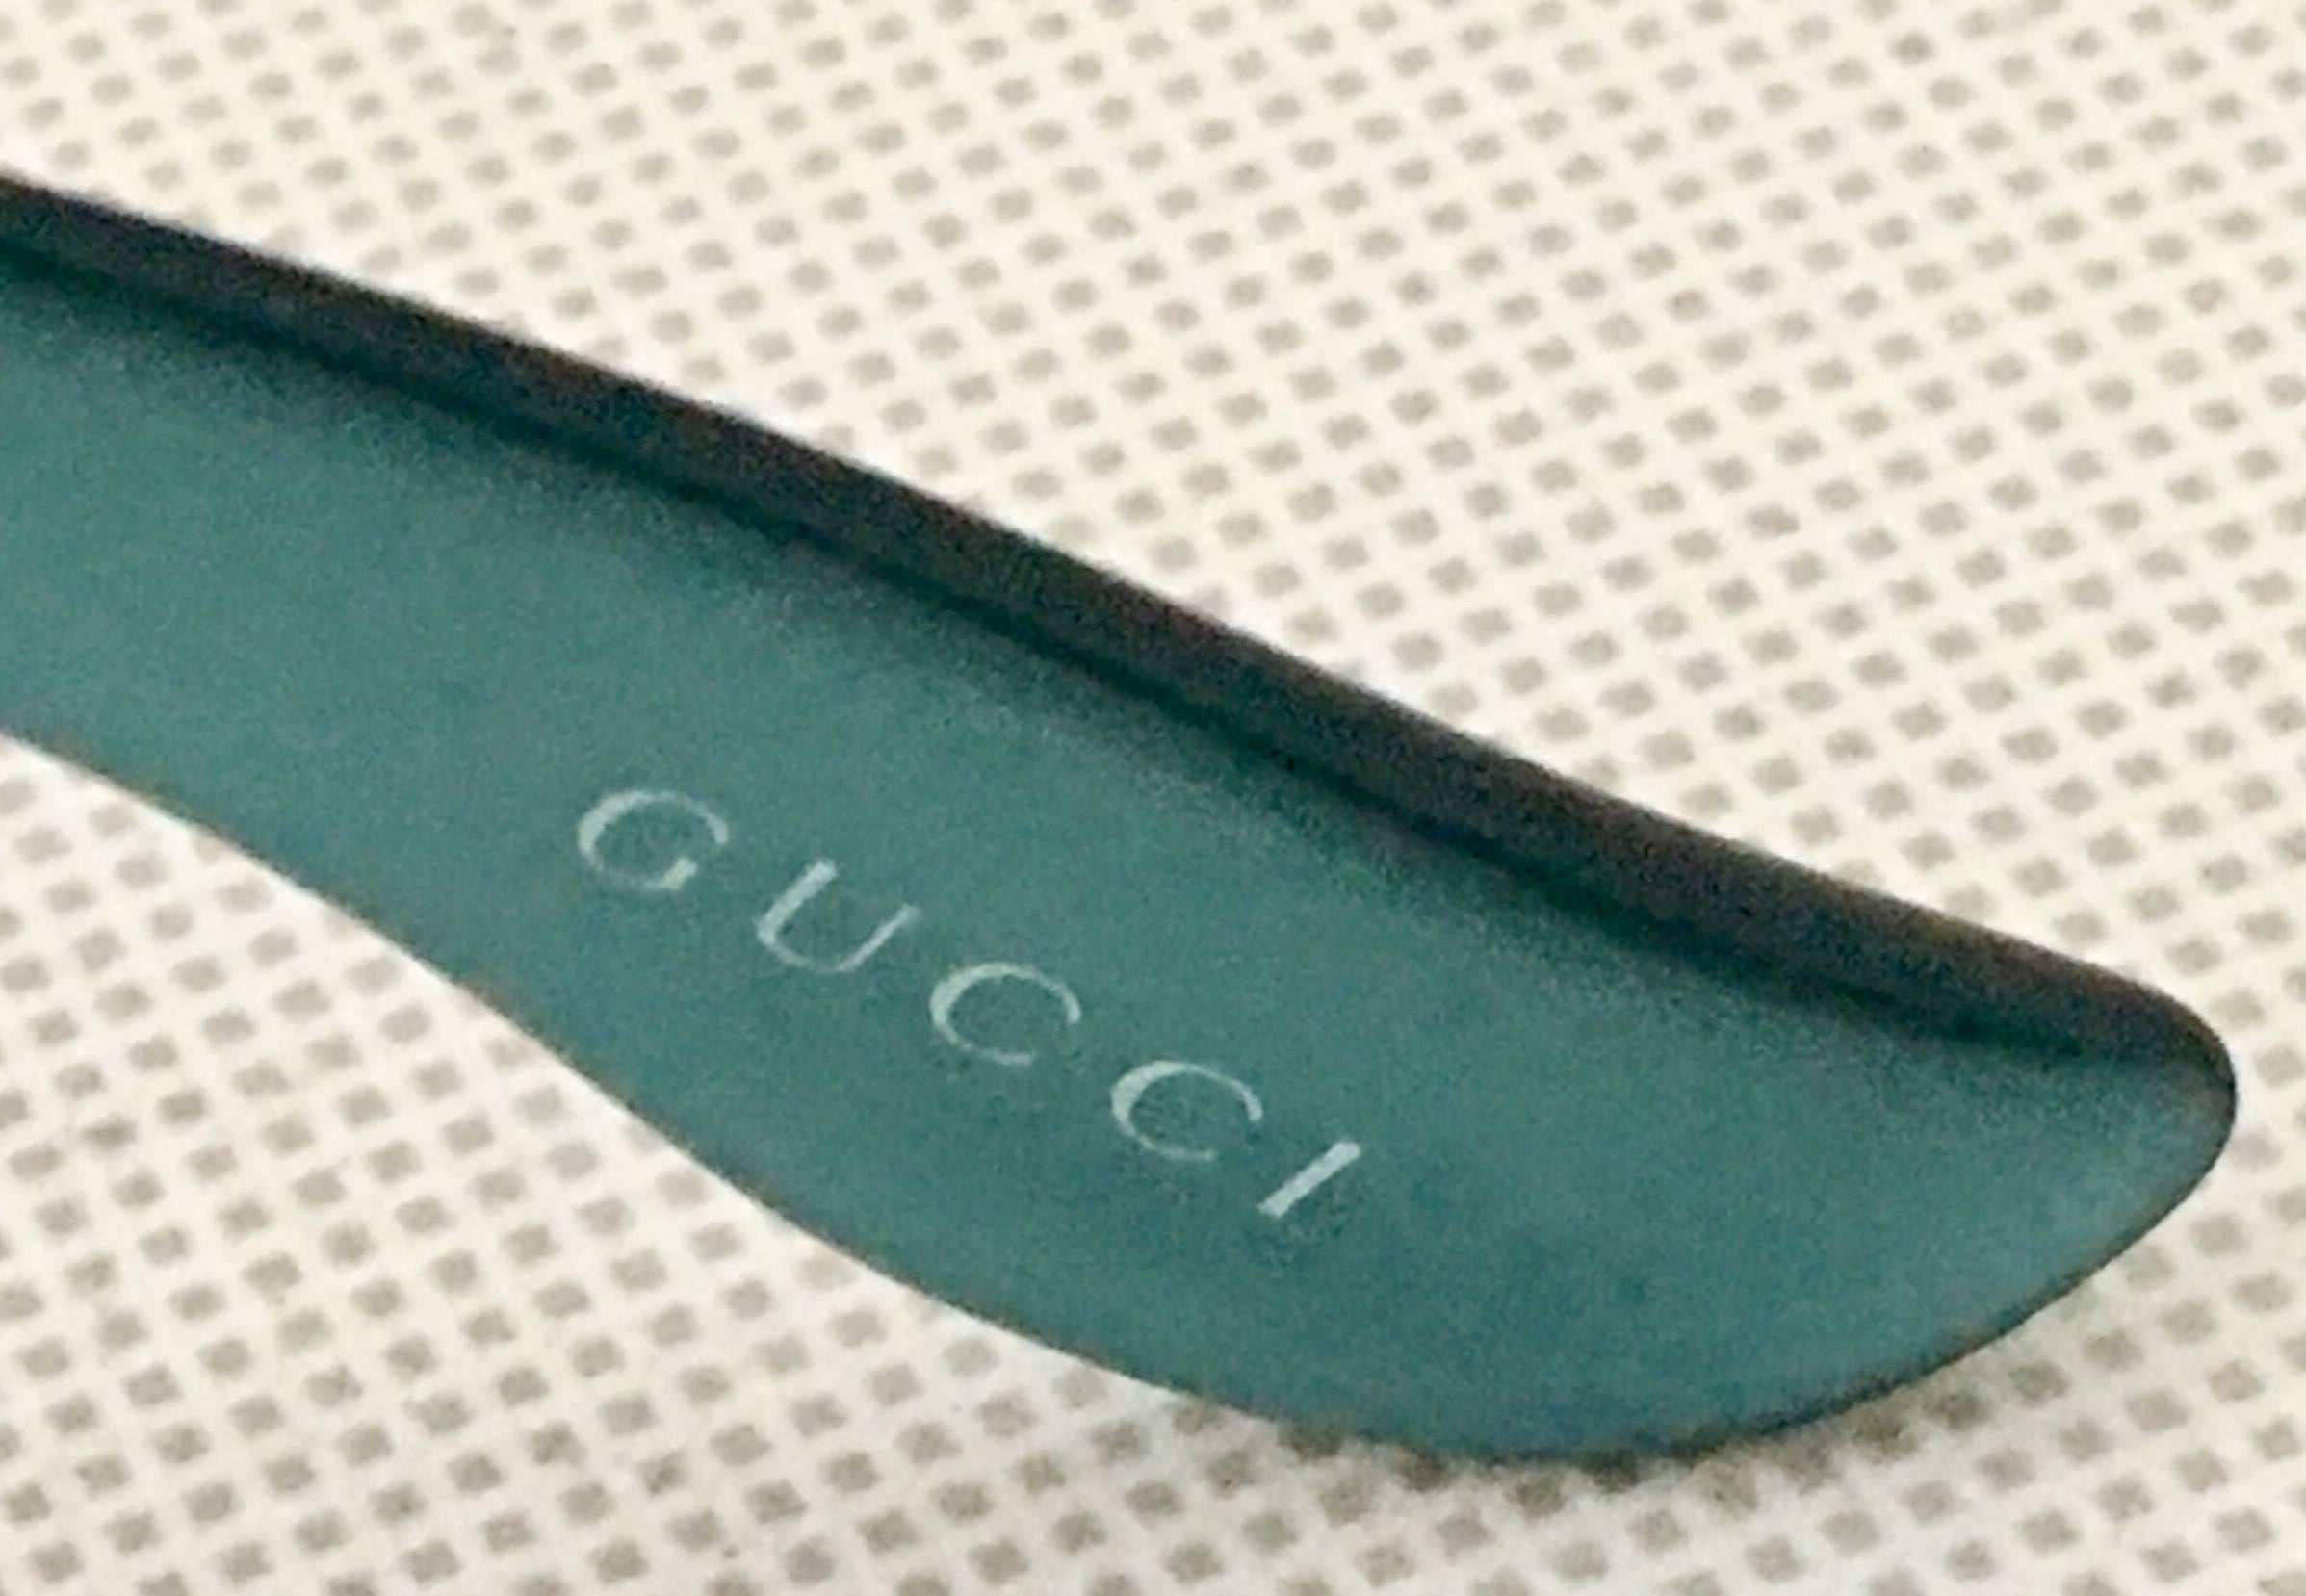 2007 Gucci Teal Oversized Logo Sunglasses-Italy 2